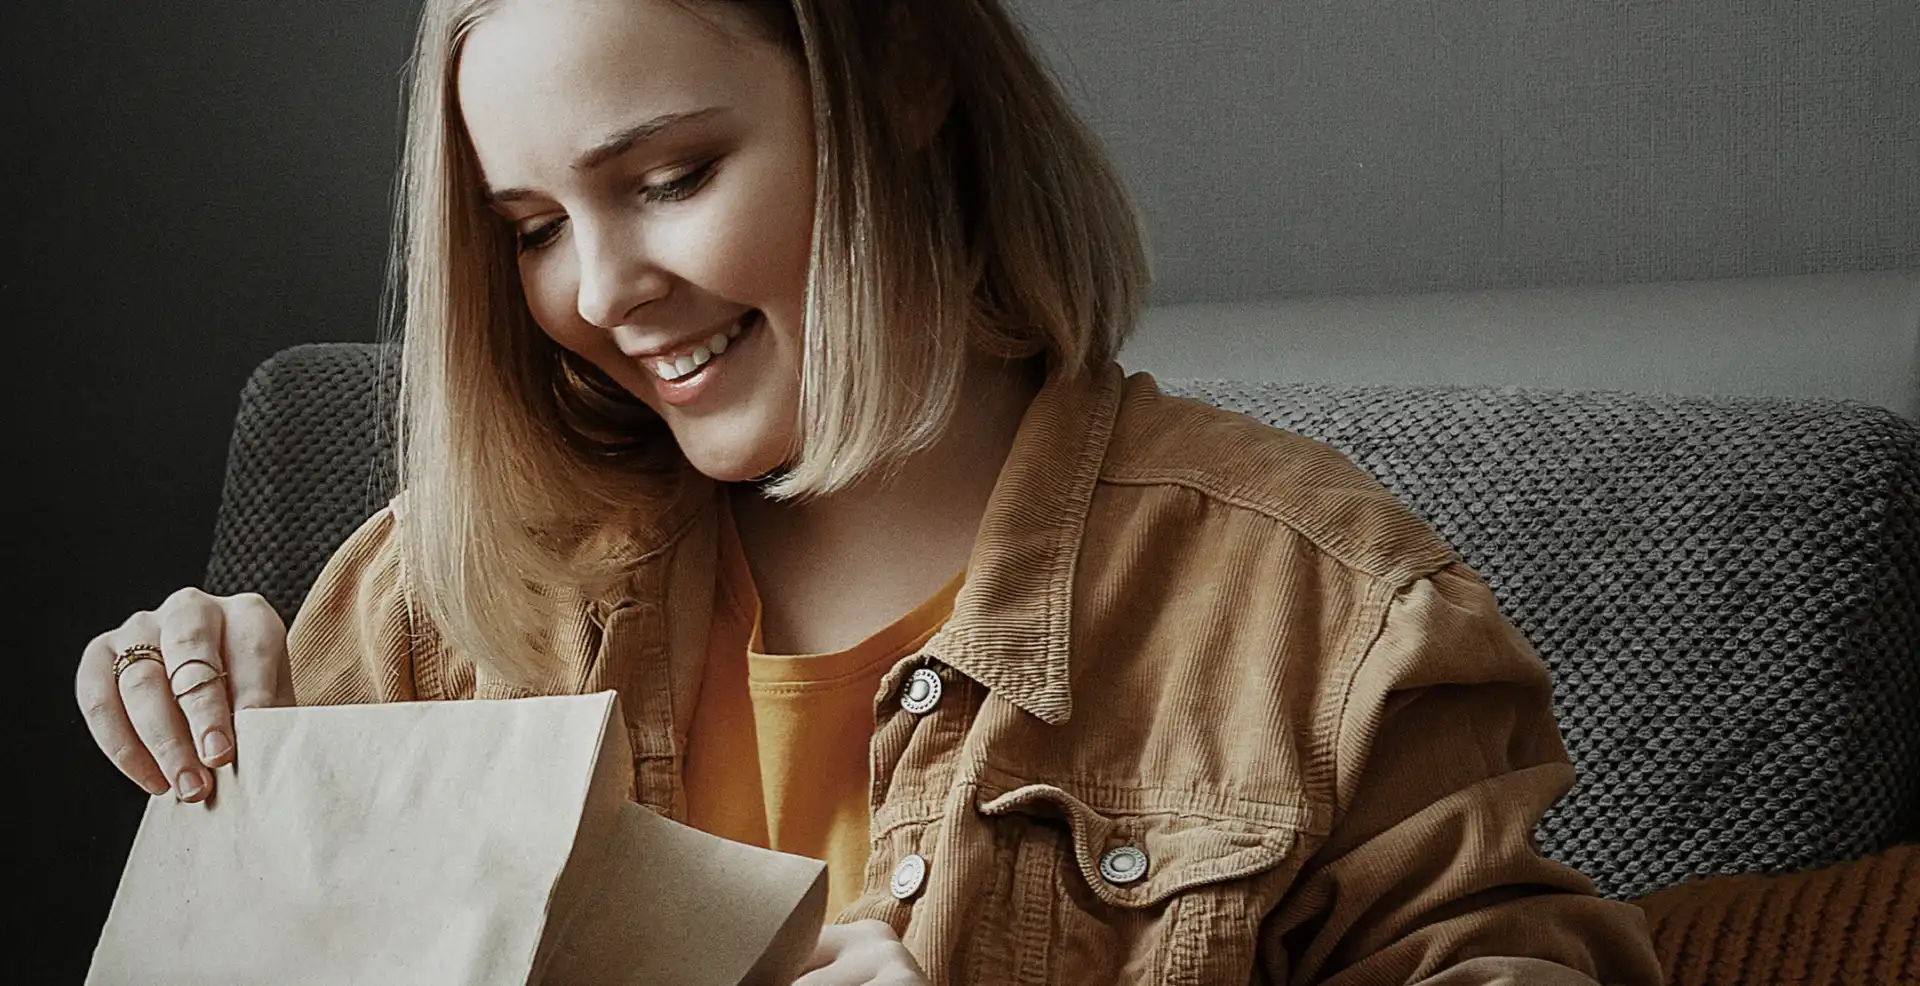 A woman on a couch holds a brown paper bag, opening it to reveal a surprise gift inside